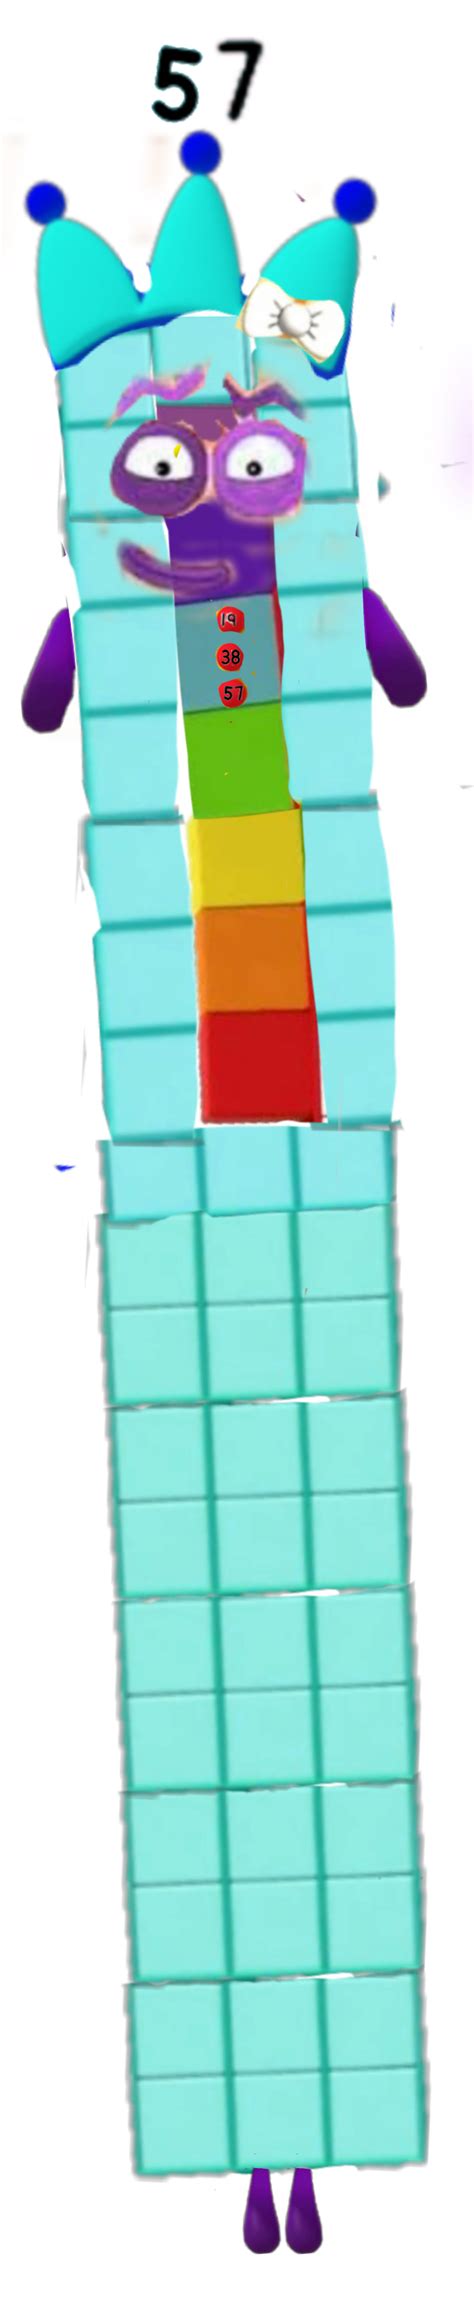 Fan Animation Numberblocks 57 58 And 59 Youtube Hot Sex Picture